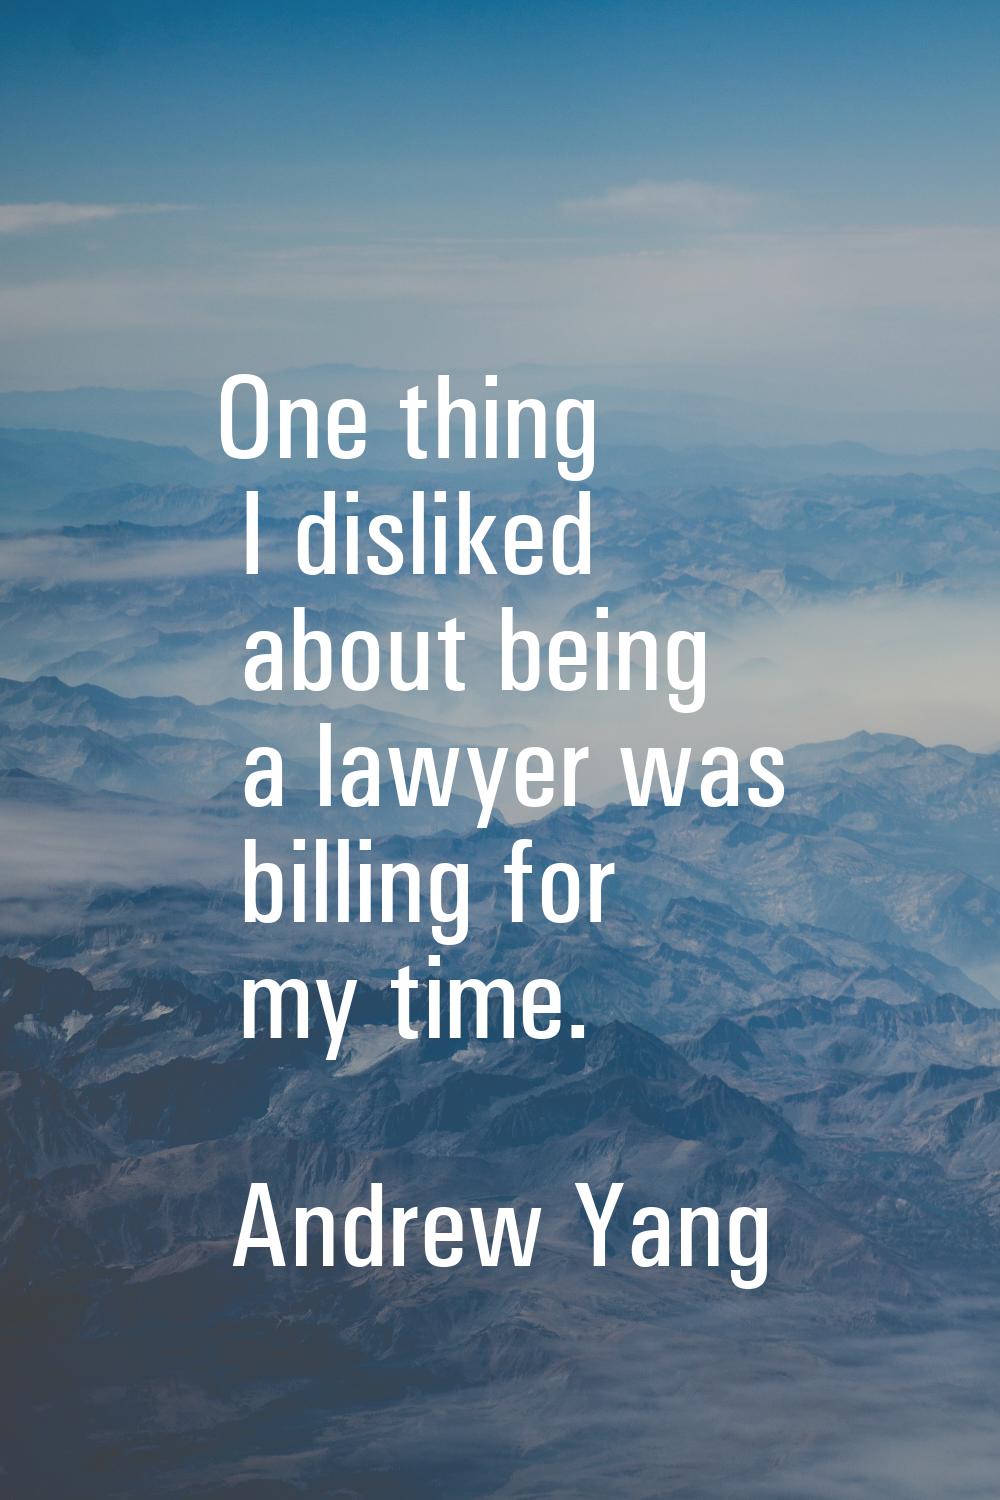 One thing I disliked about being a lawyer was billing for my time.